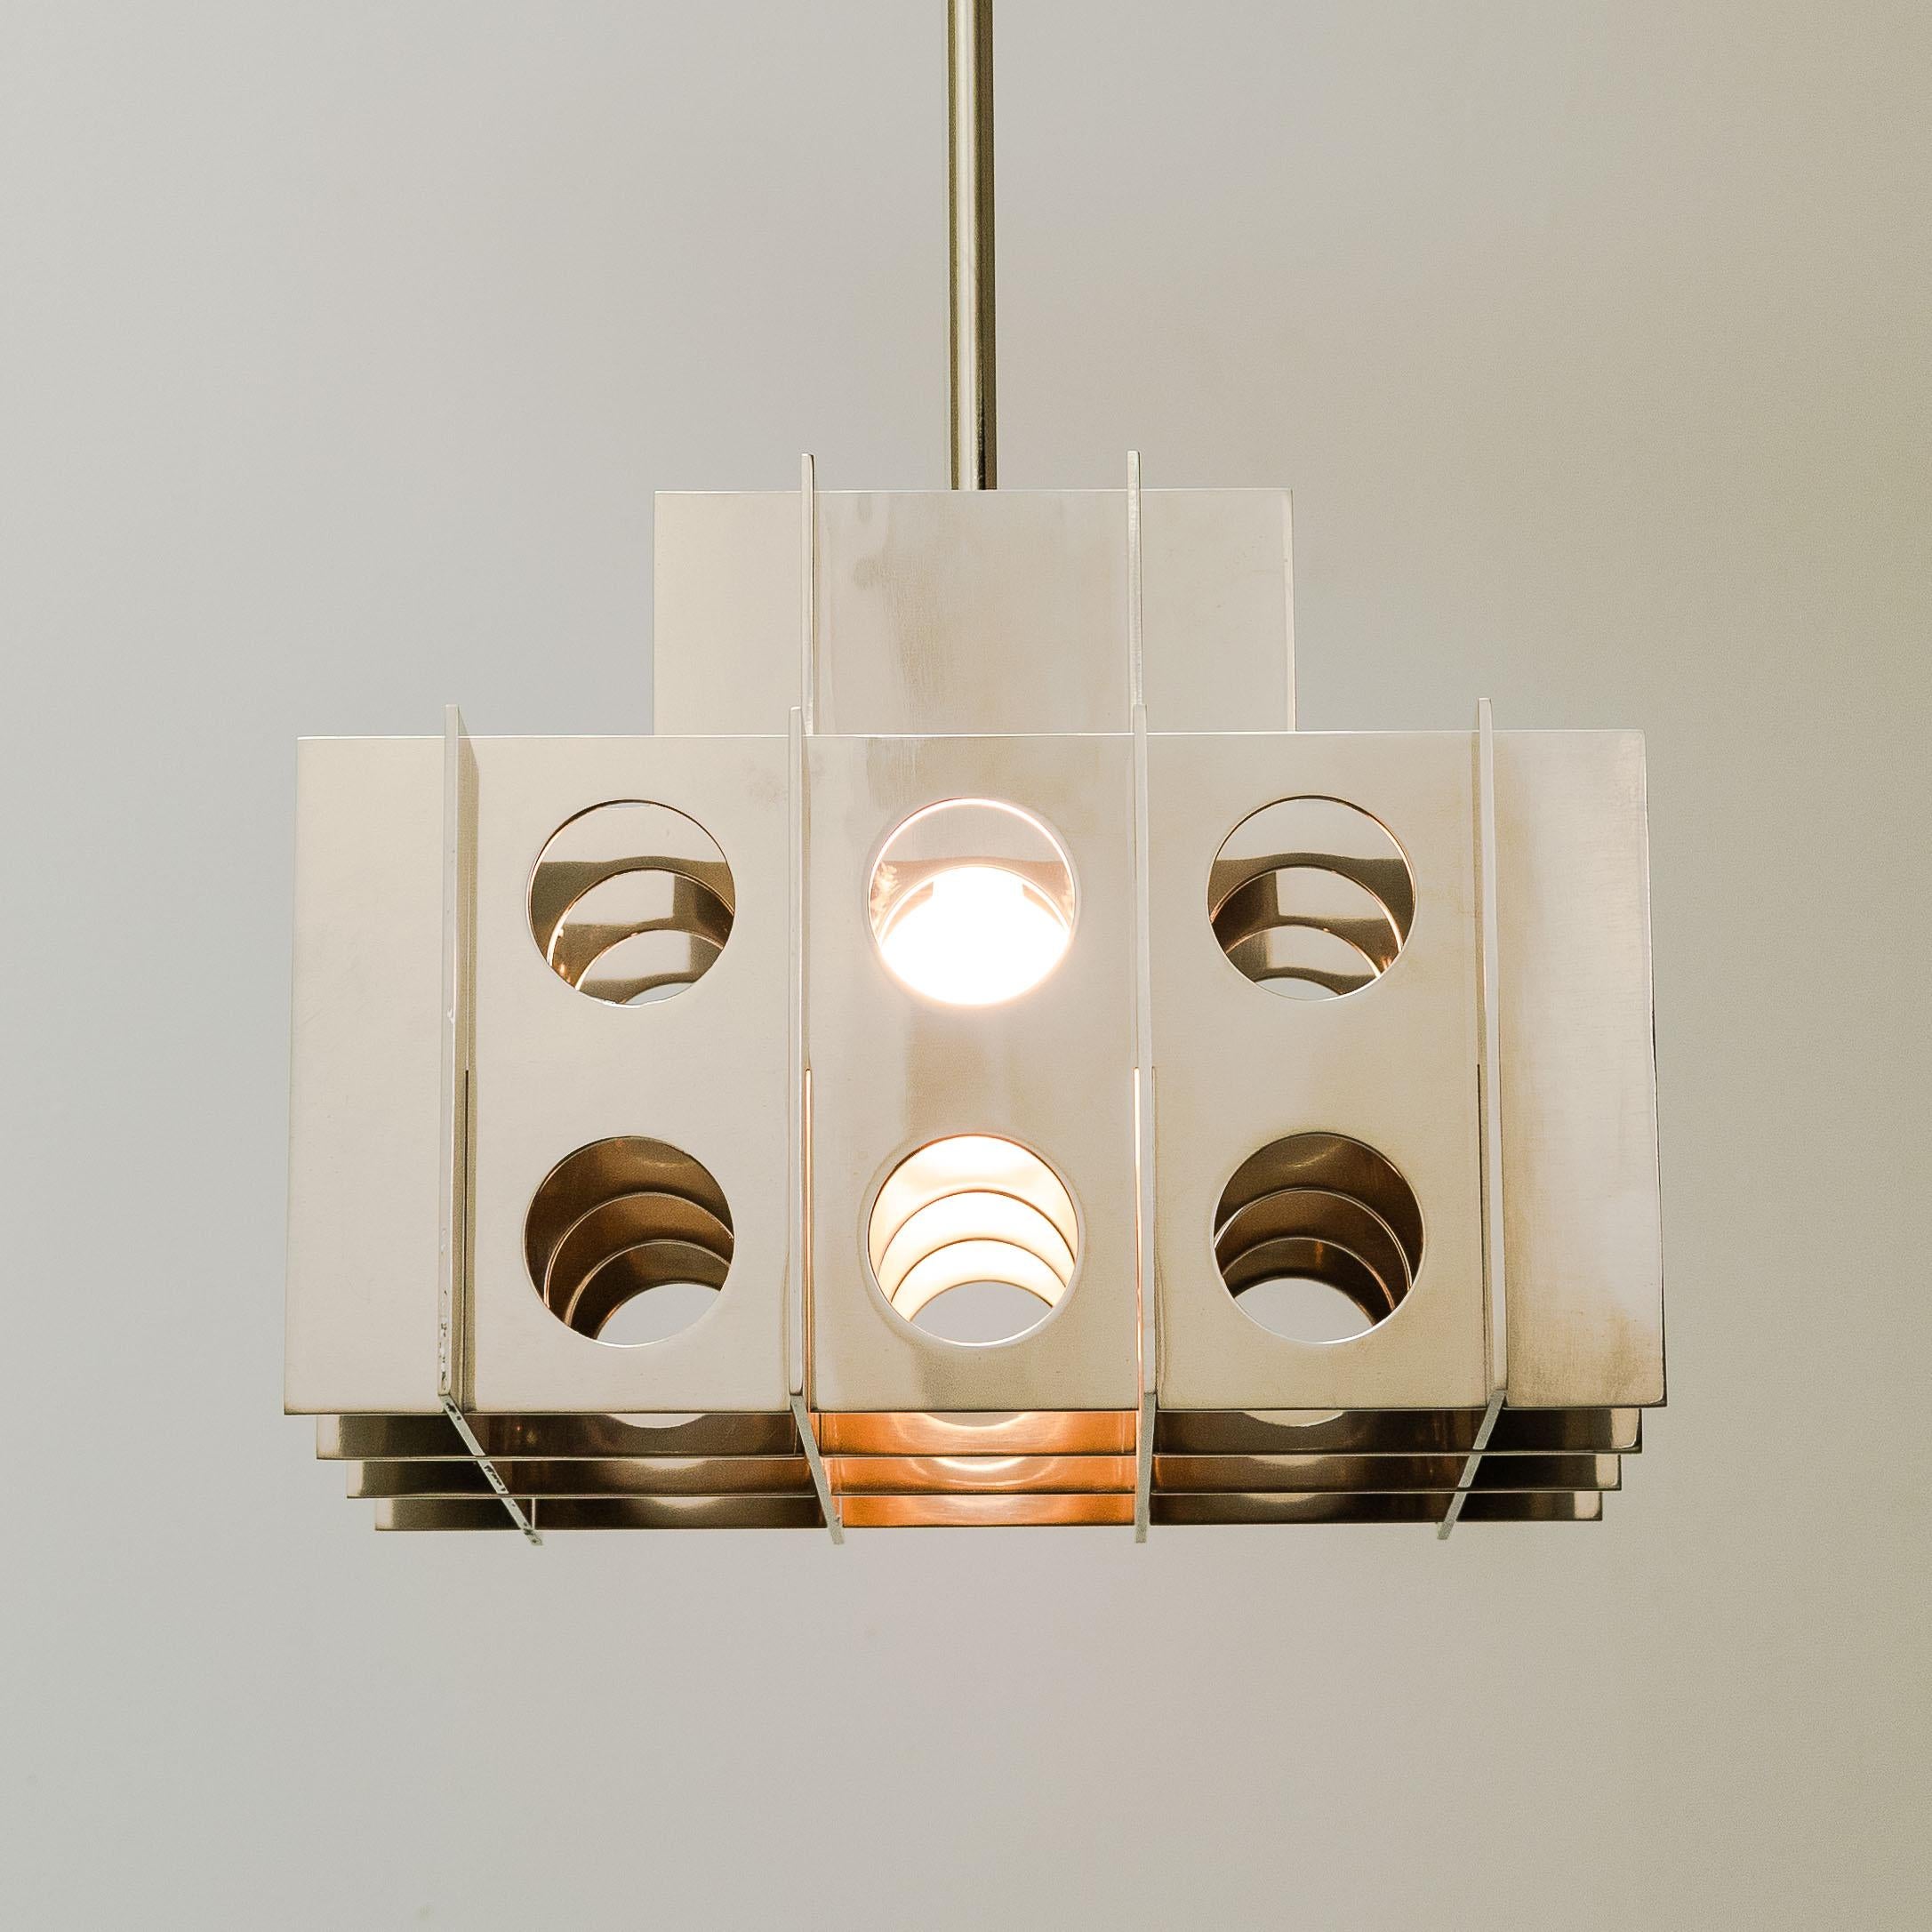 Contemporary Tenfold Pendant 3TA 24inch, Waxed Aluminum, Geometric, Brutalist Ceiling Light For Sale